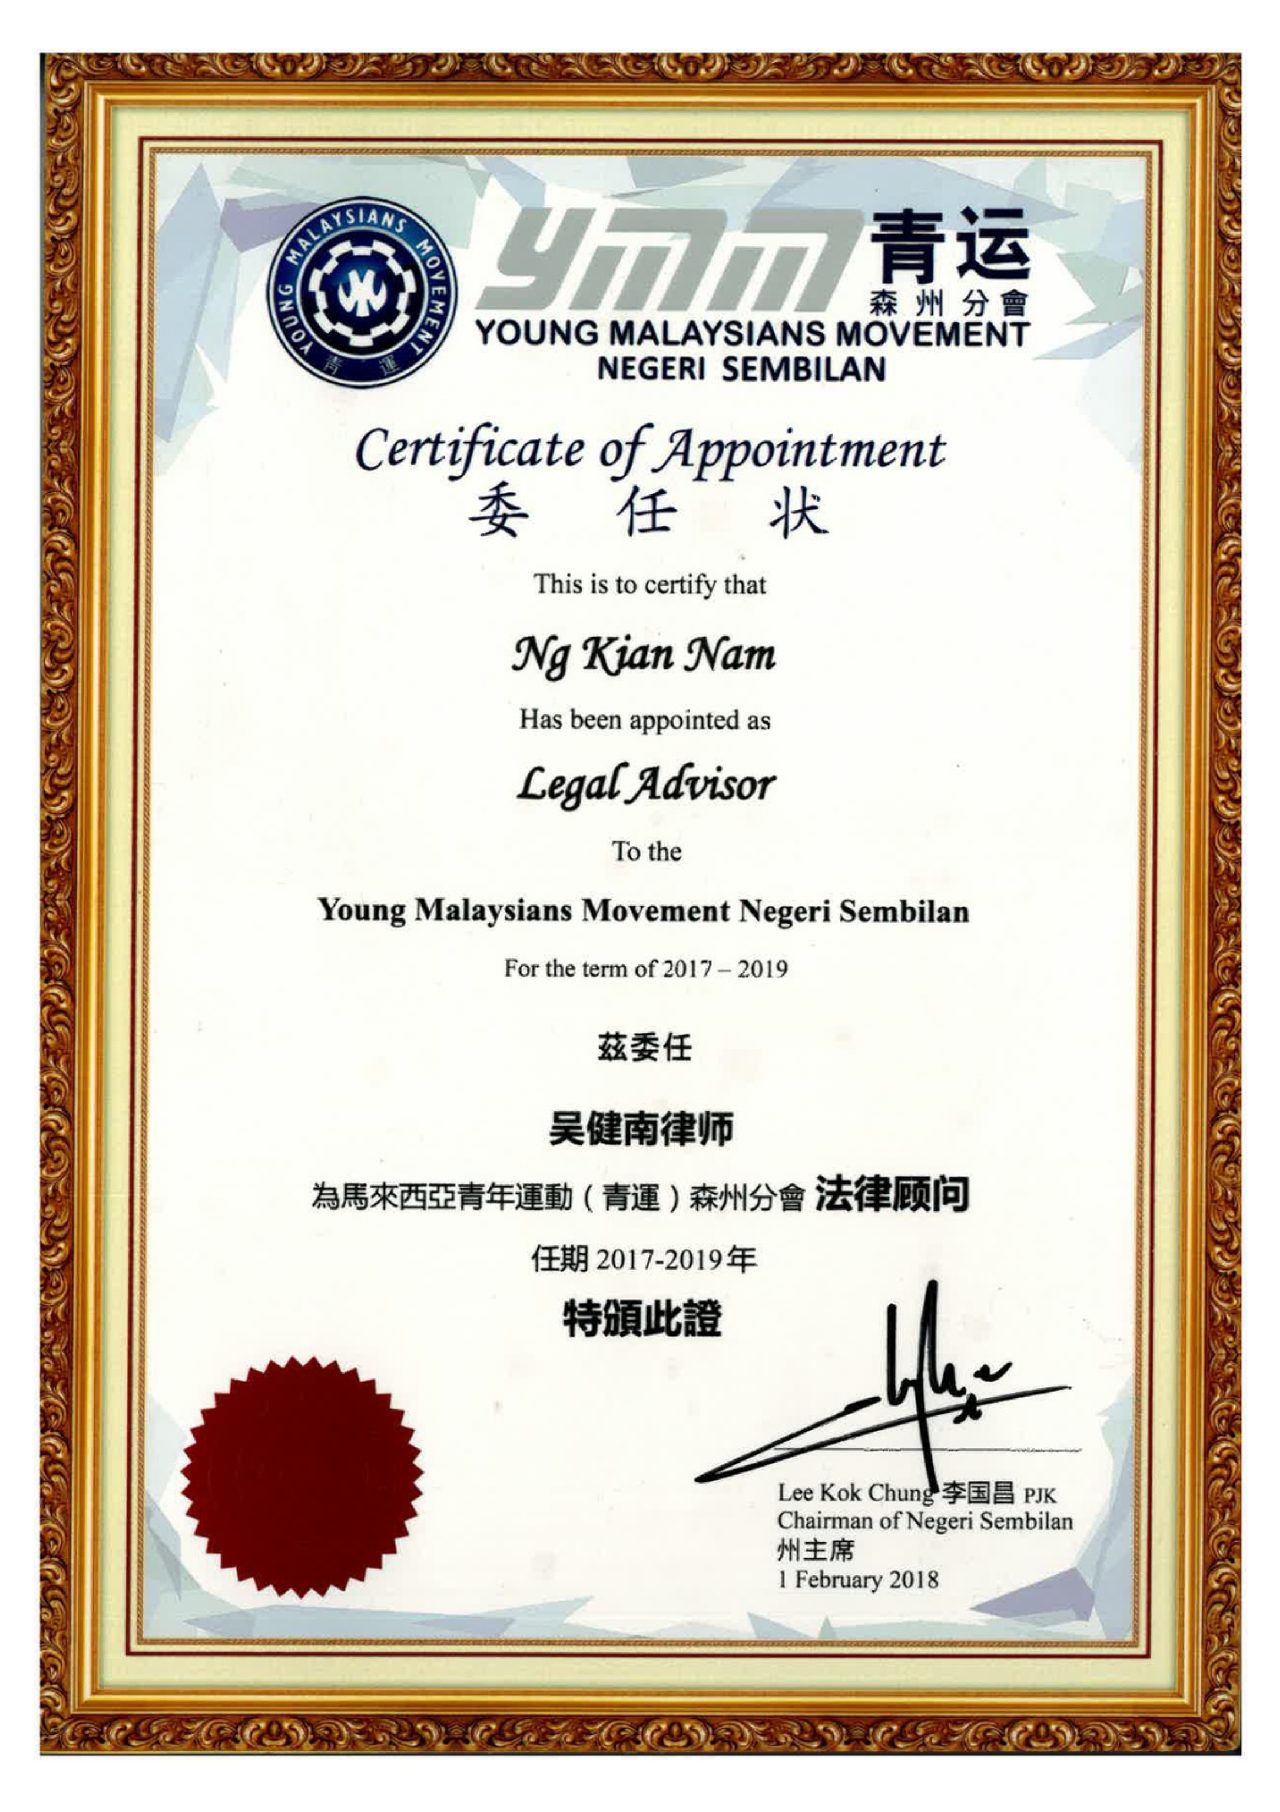 15. CERTIFICATE OF APPOINTED AS LEGAL ADVISOR - YOUNG MALAYSIANS MOVEMENT N.S.